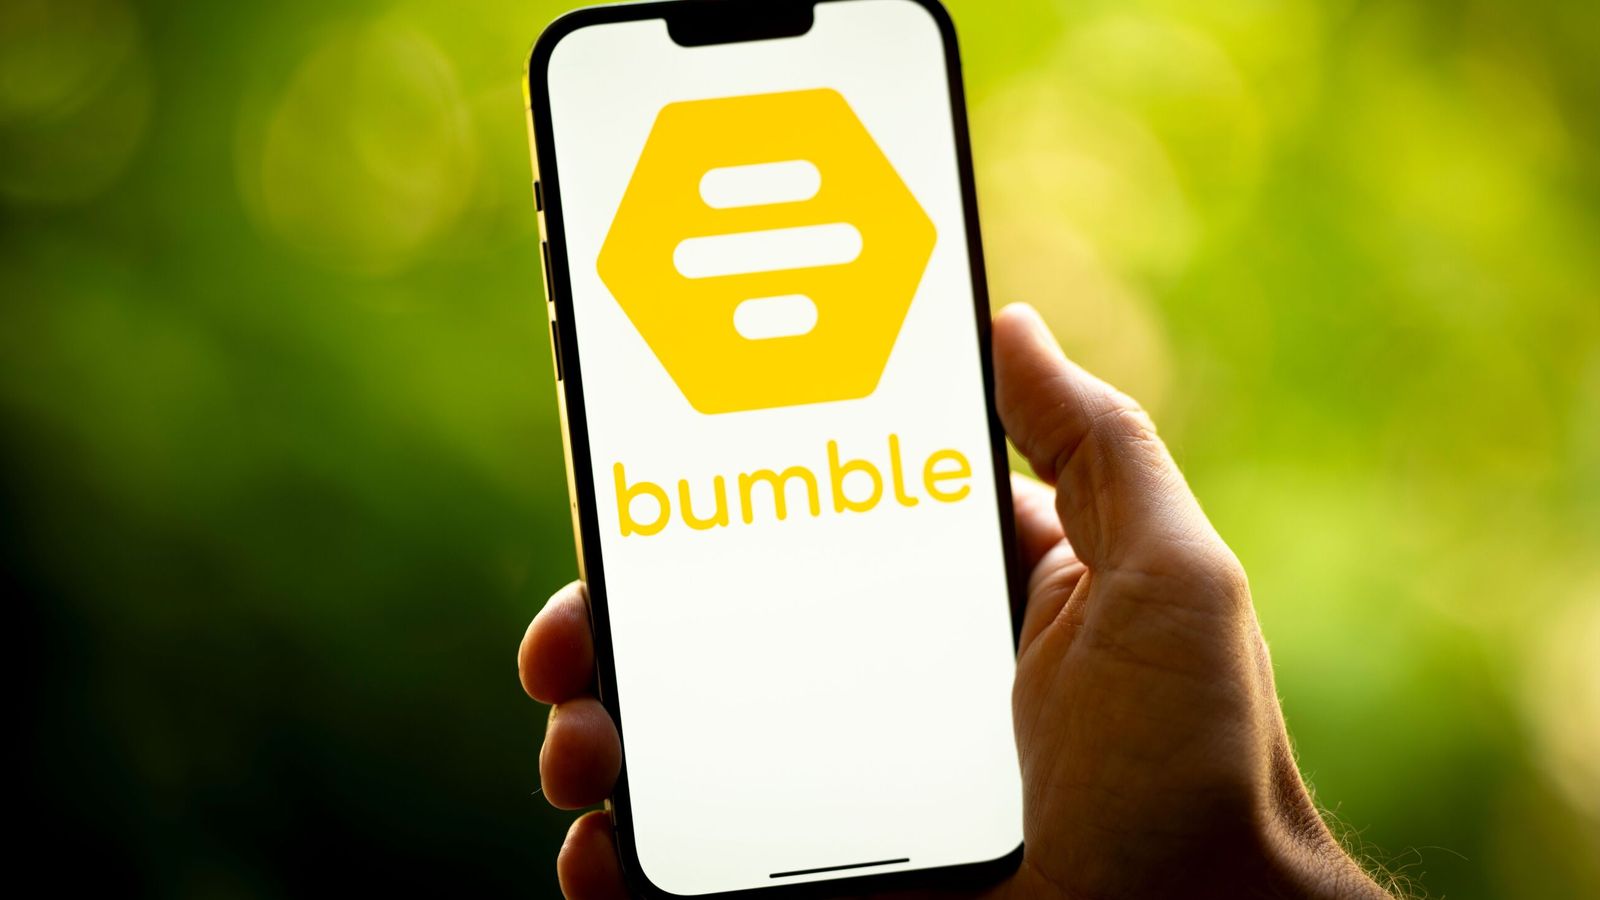 Bumble apologises for adverts showing to mock celibacy